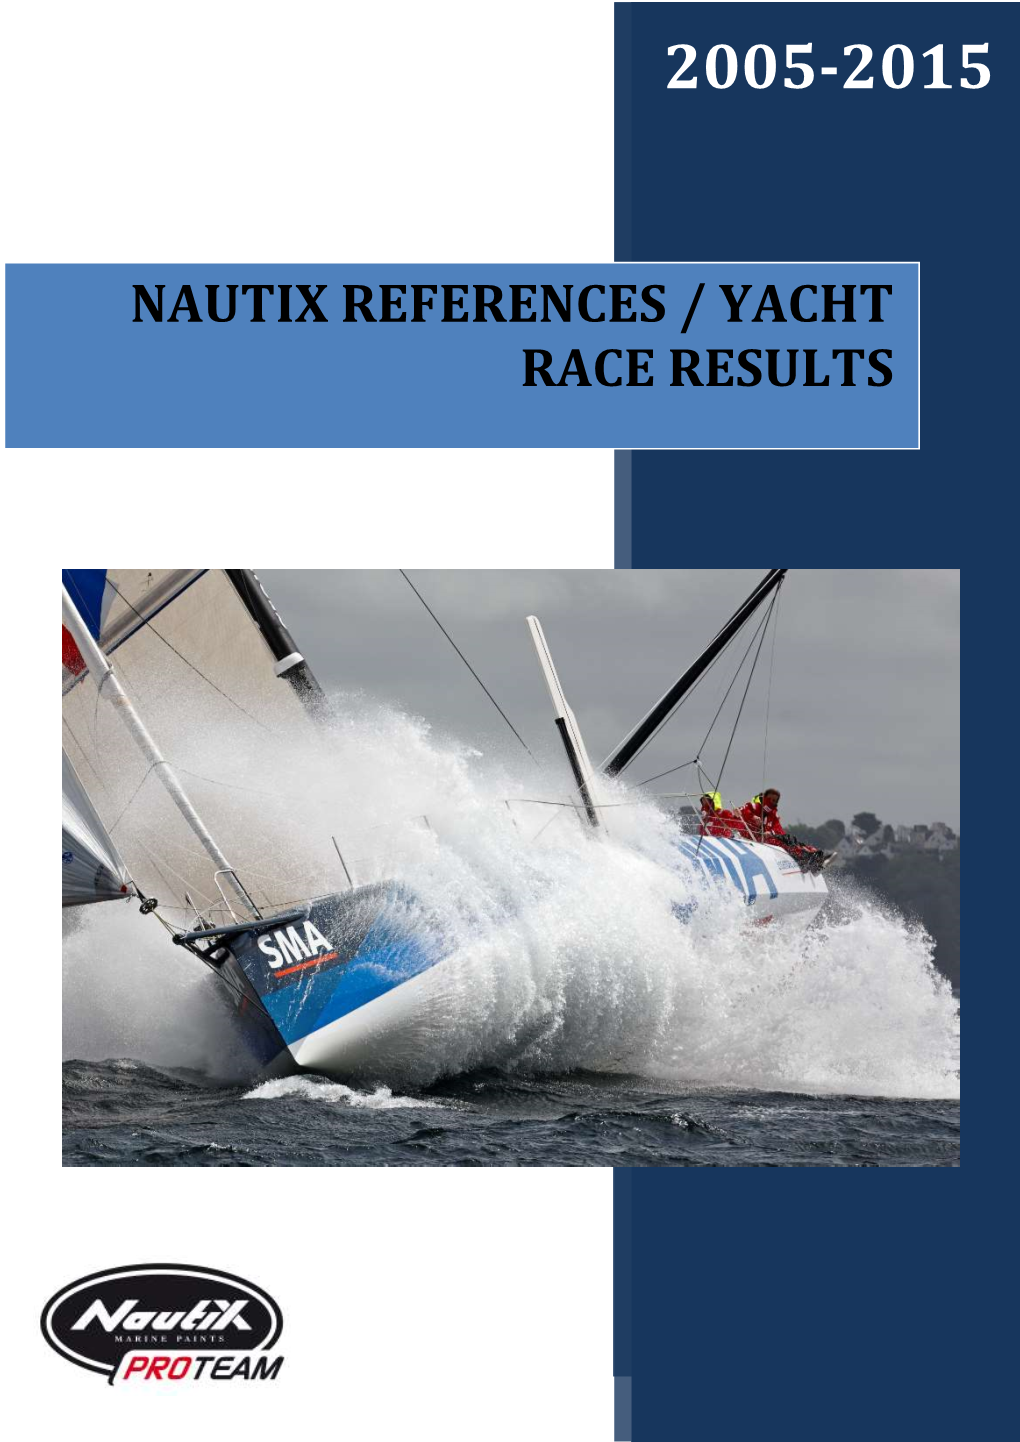 Nautix References / Yacht Race Results